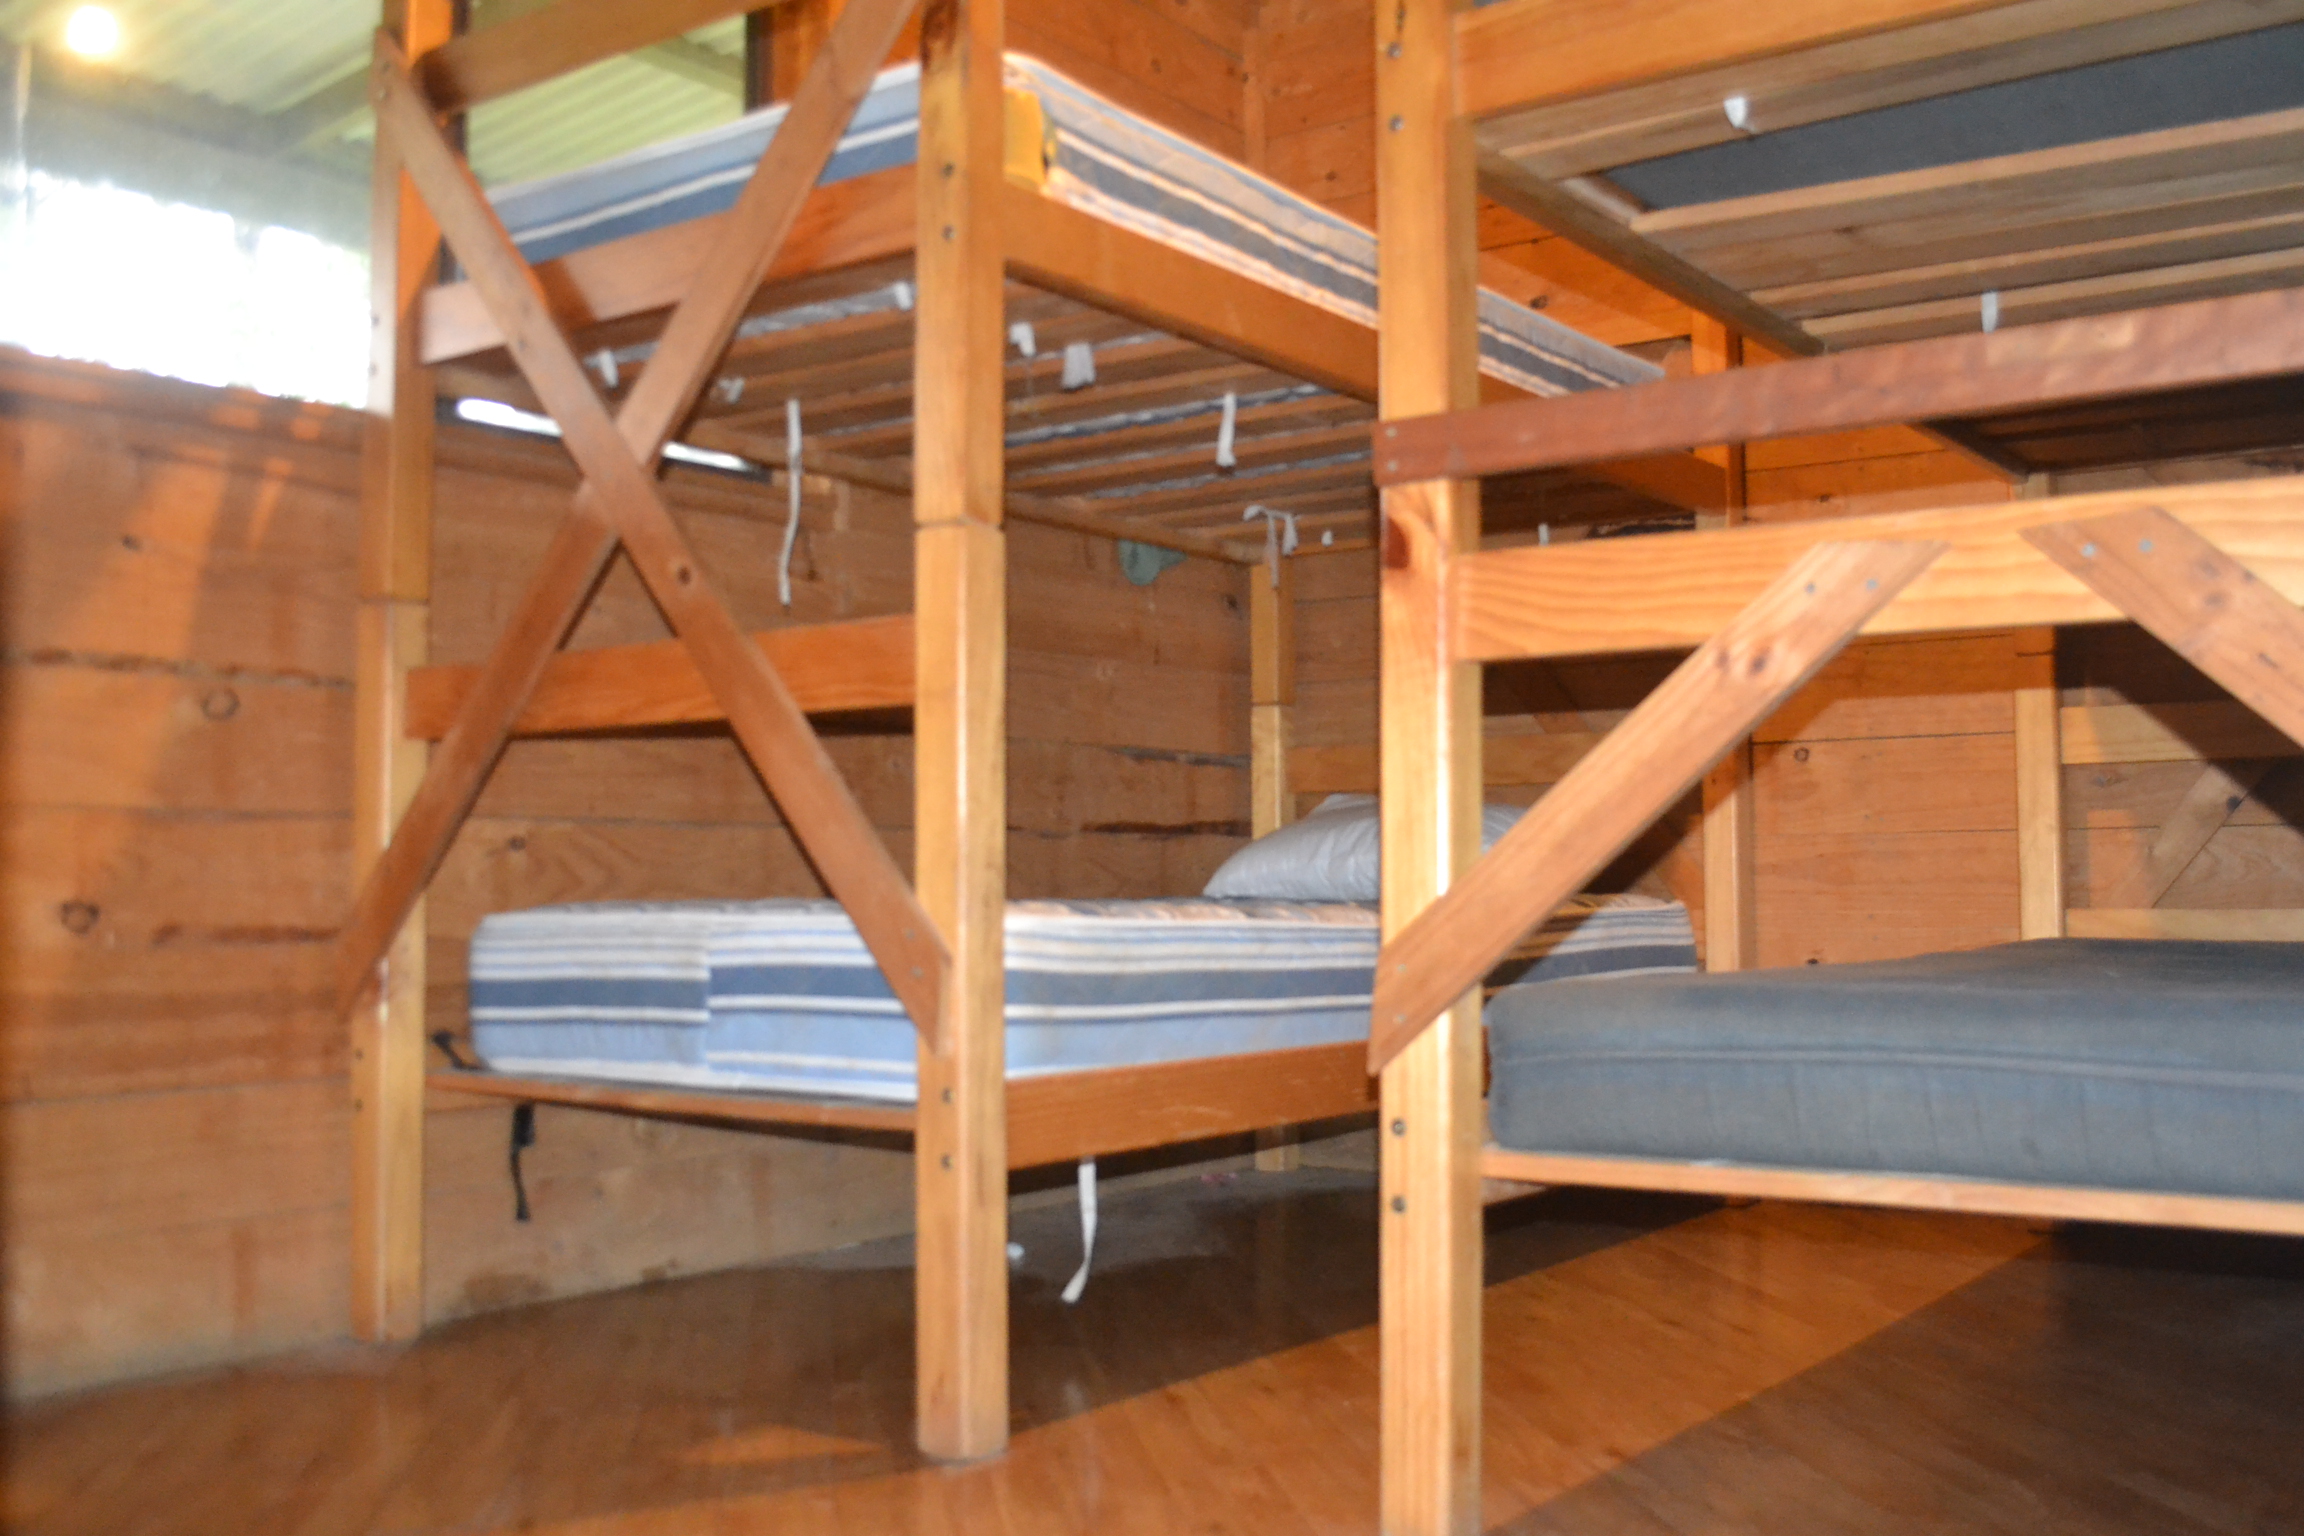 7. Cabin 6 beds.